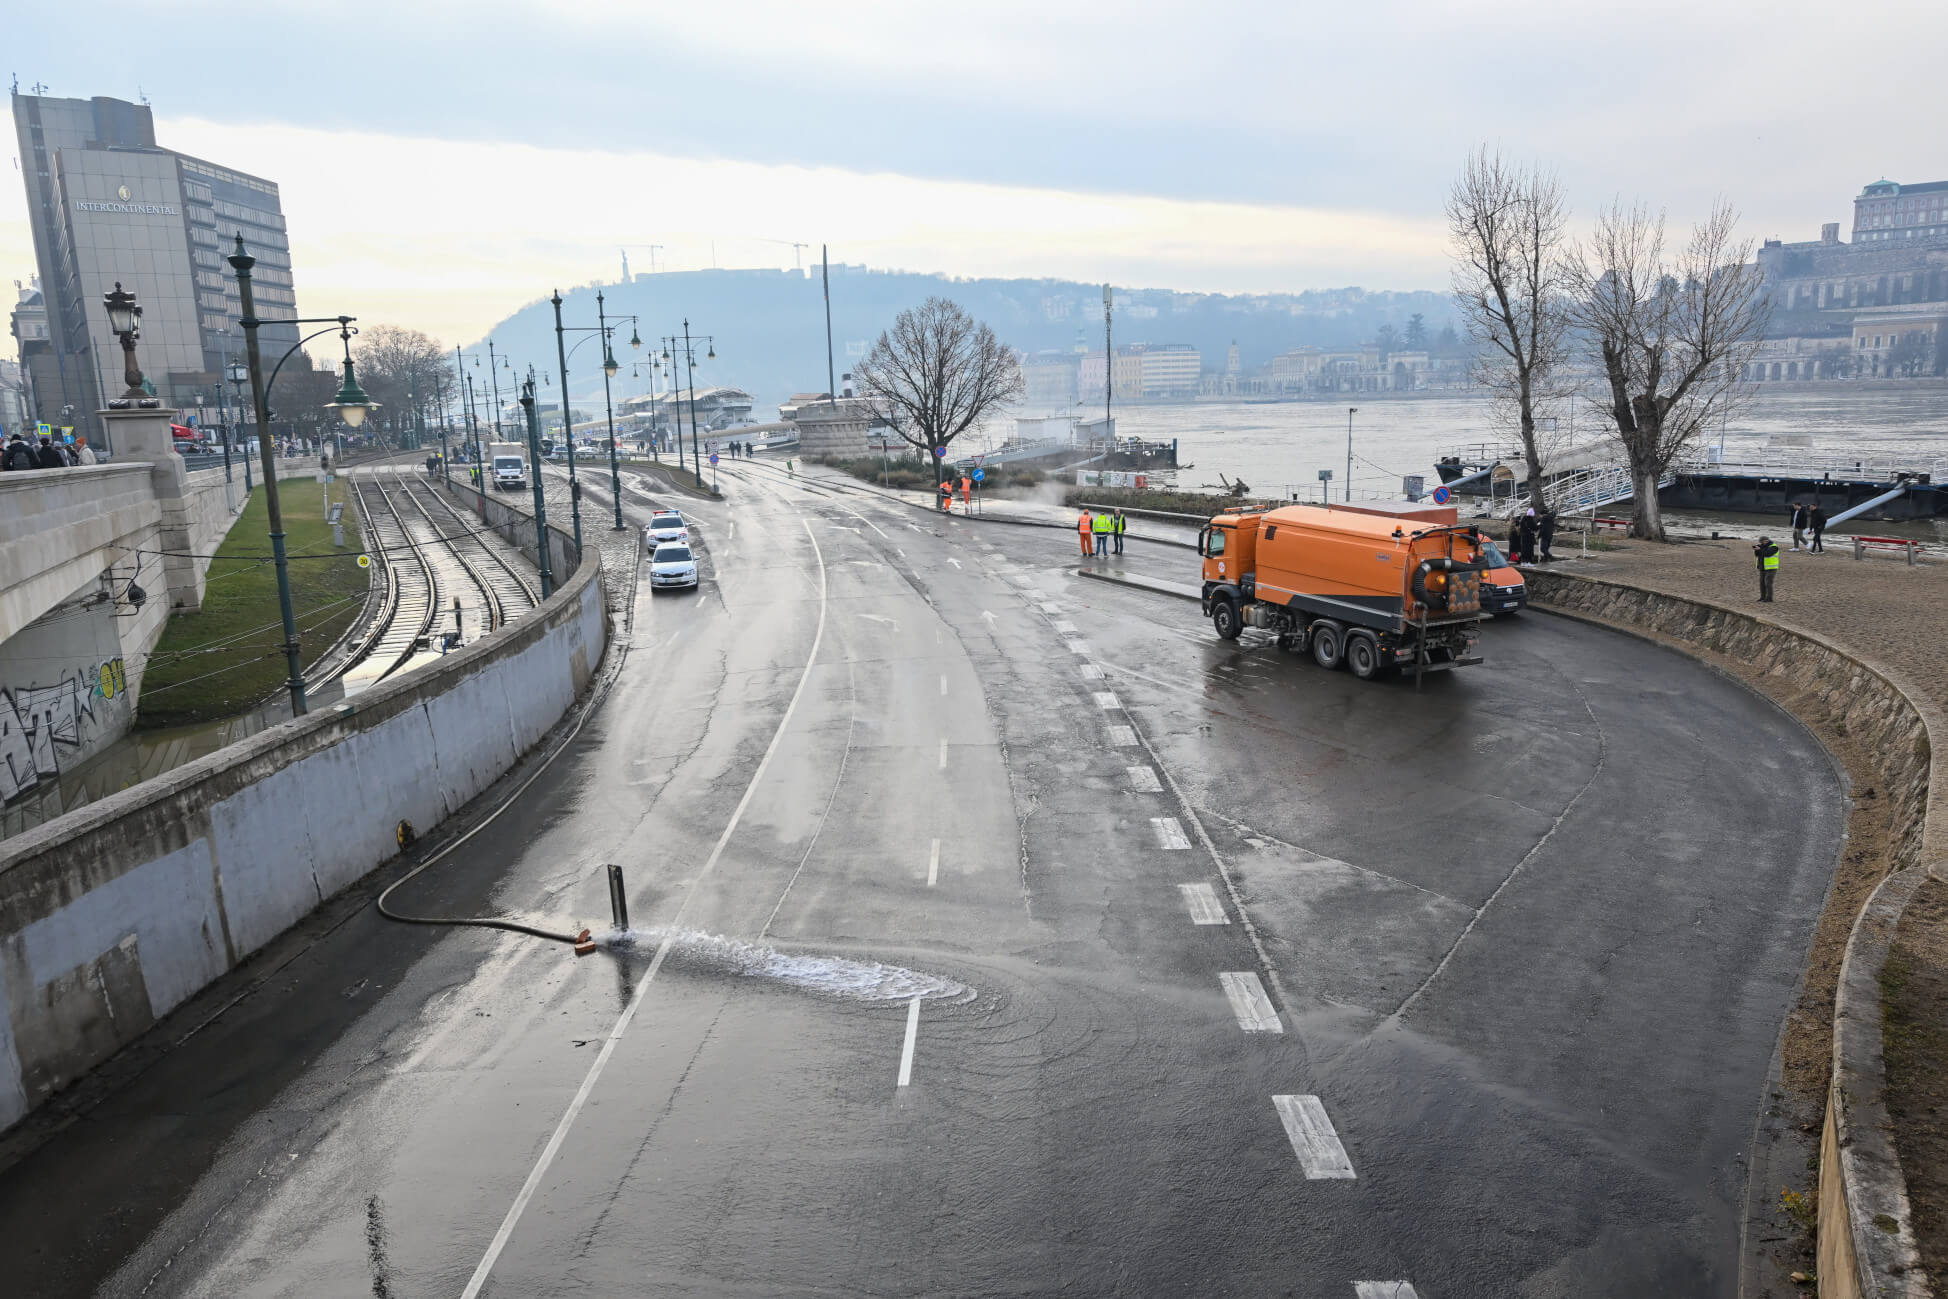 Lower Danube Embankment Road Reopened for Traffic on Sunday After Flood in Budapest